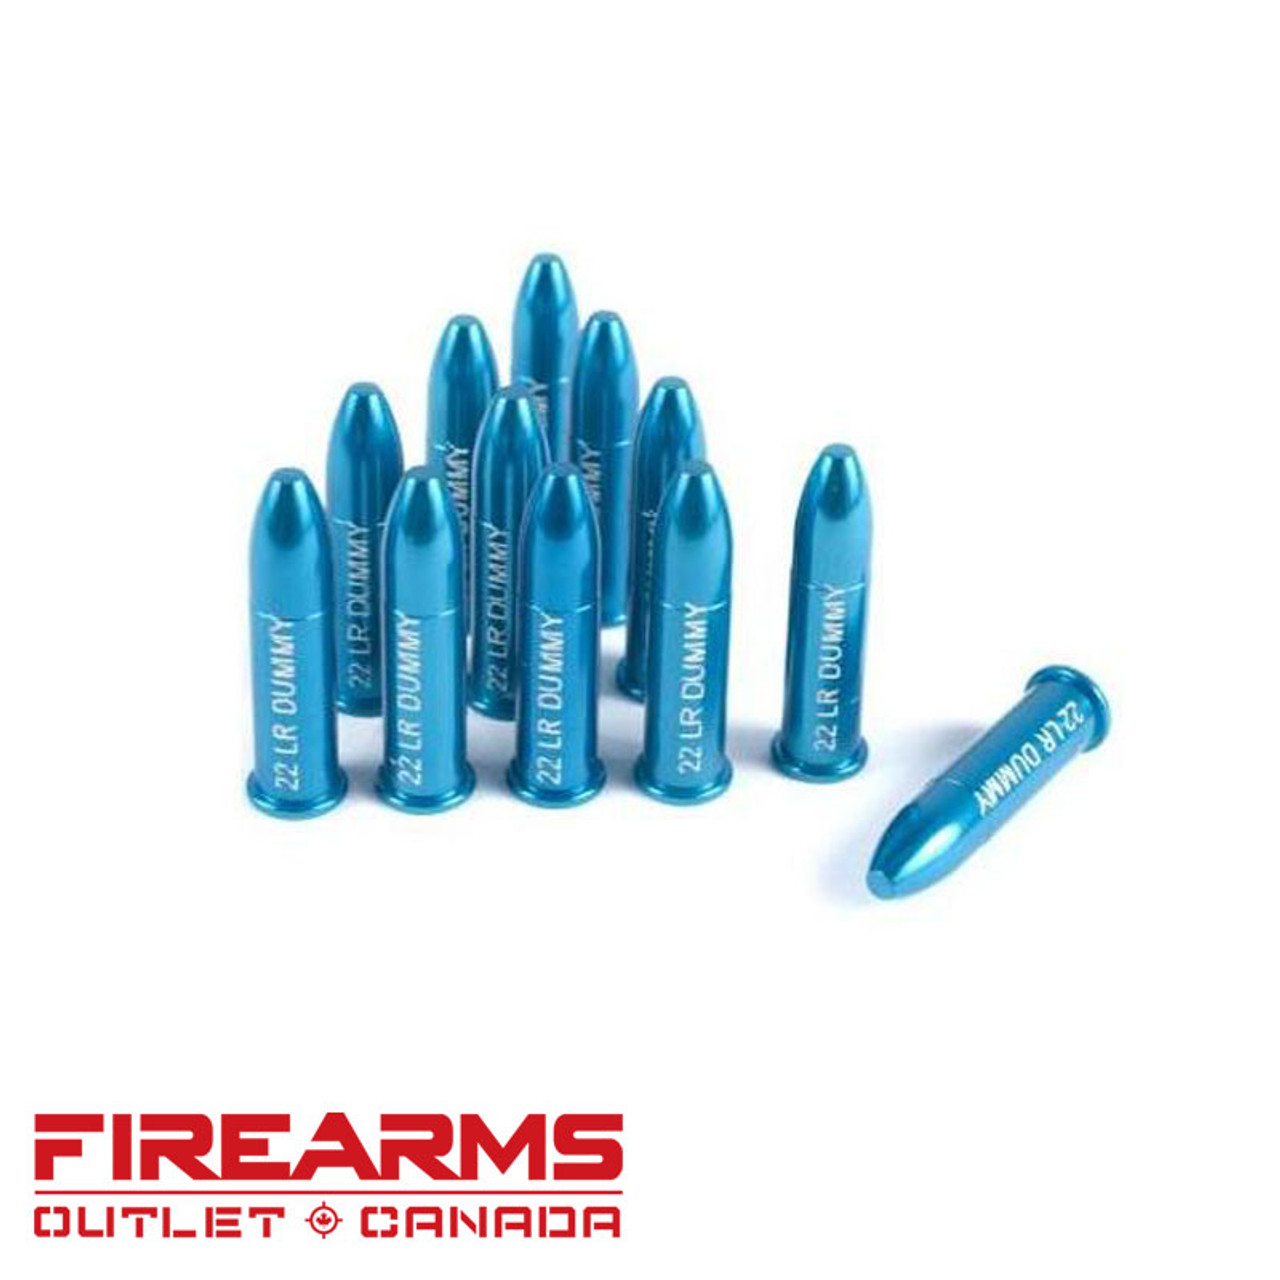 A-Zoom Action Proving Rimfire Dummy Rounds - .22 LR, 6pk [12208]